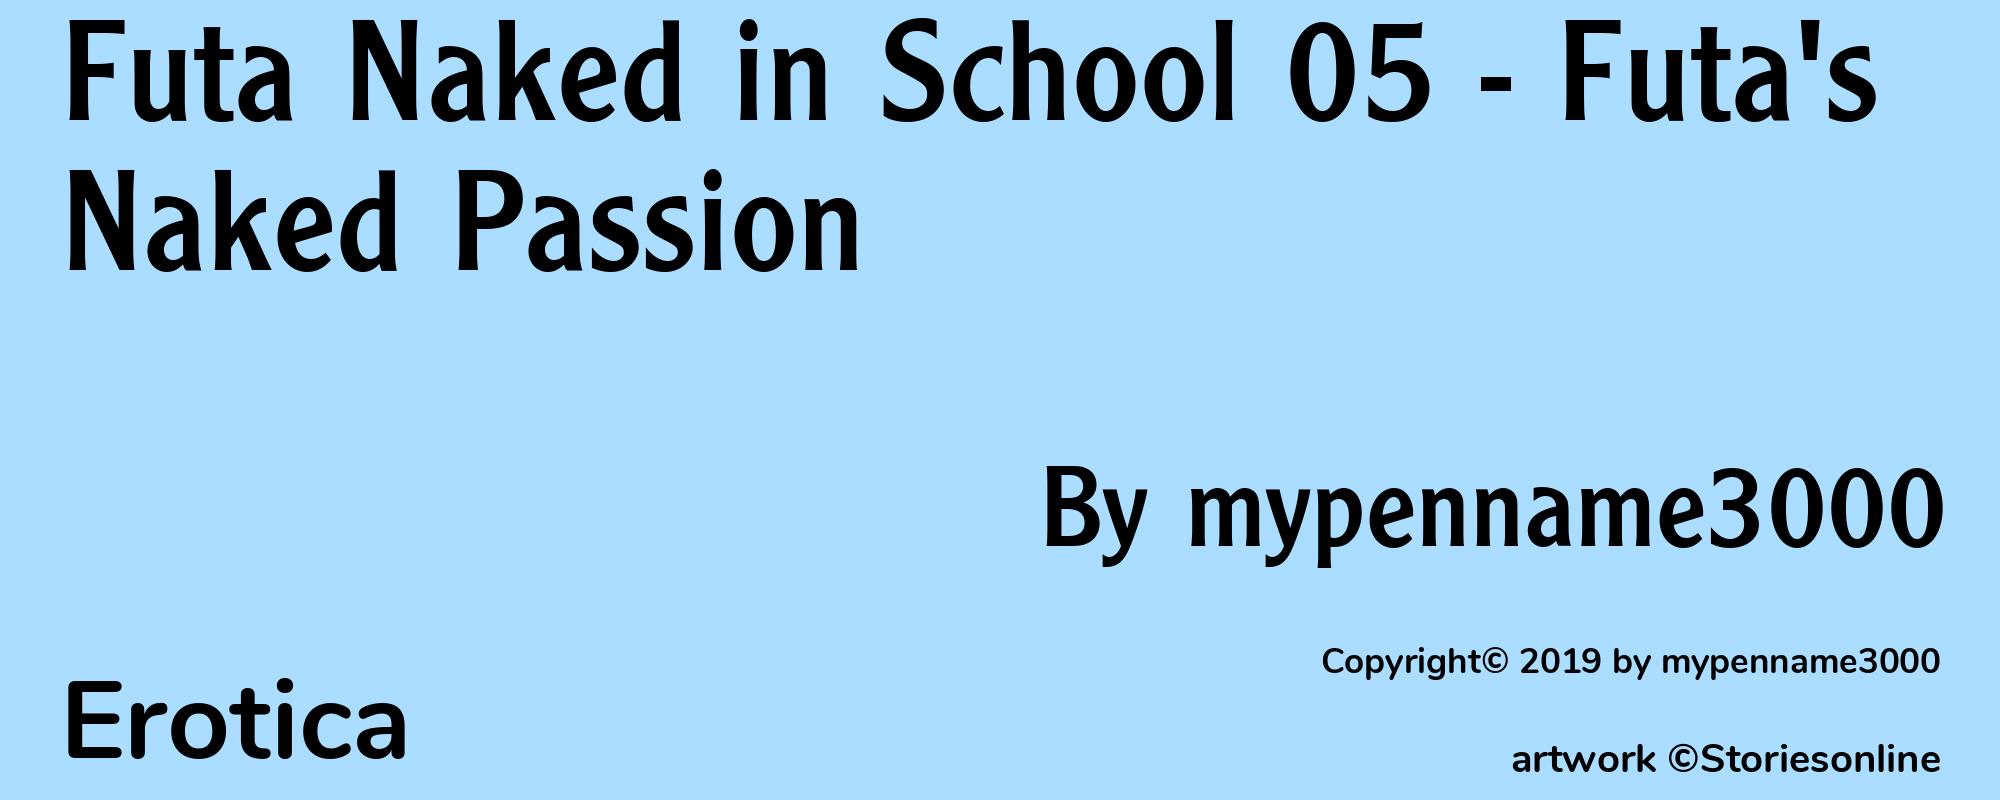 Futa Naked in School 05 - Futa's Naked Passion - Cover